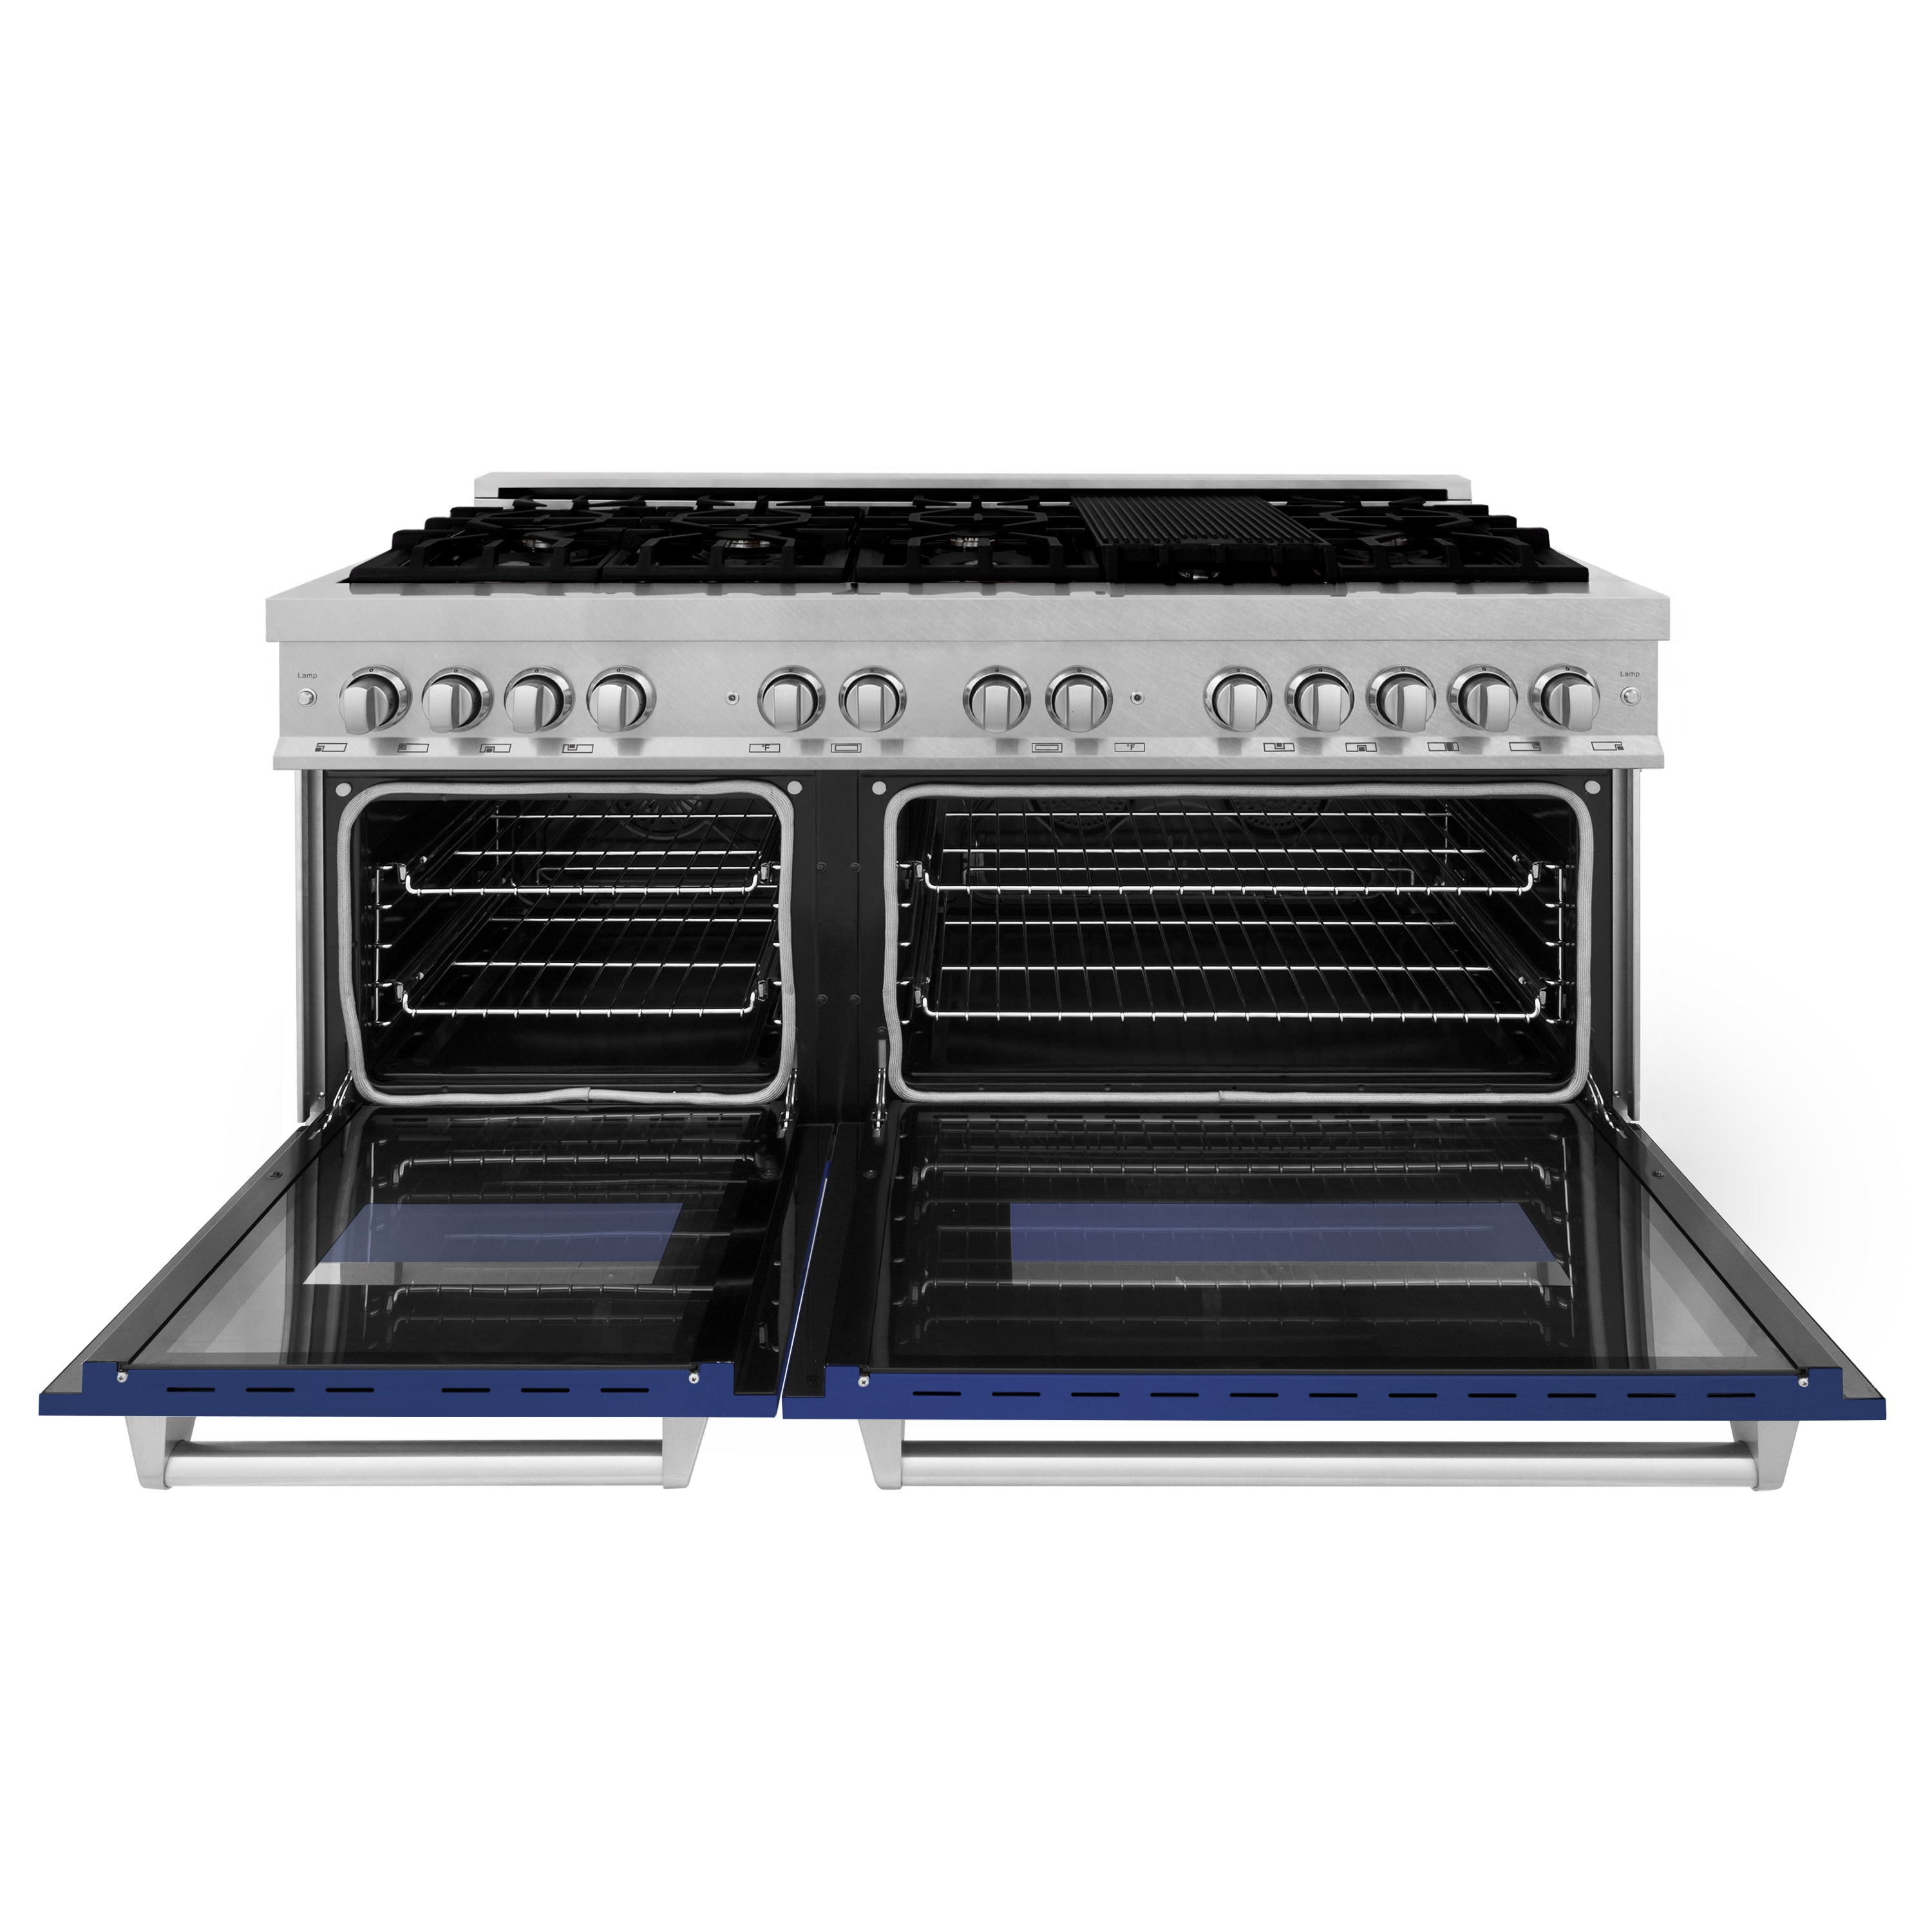 ZLINE 60" 7.4 cu. ft. Dual Fuel Range with Gas Stove and Electric Oven in Fingerprint Resistant Stainless Steel (RAS-60)